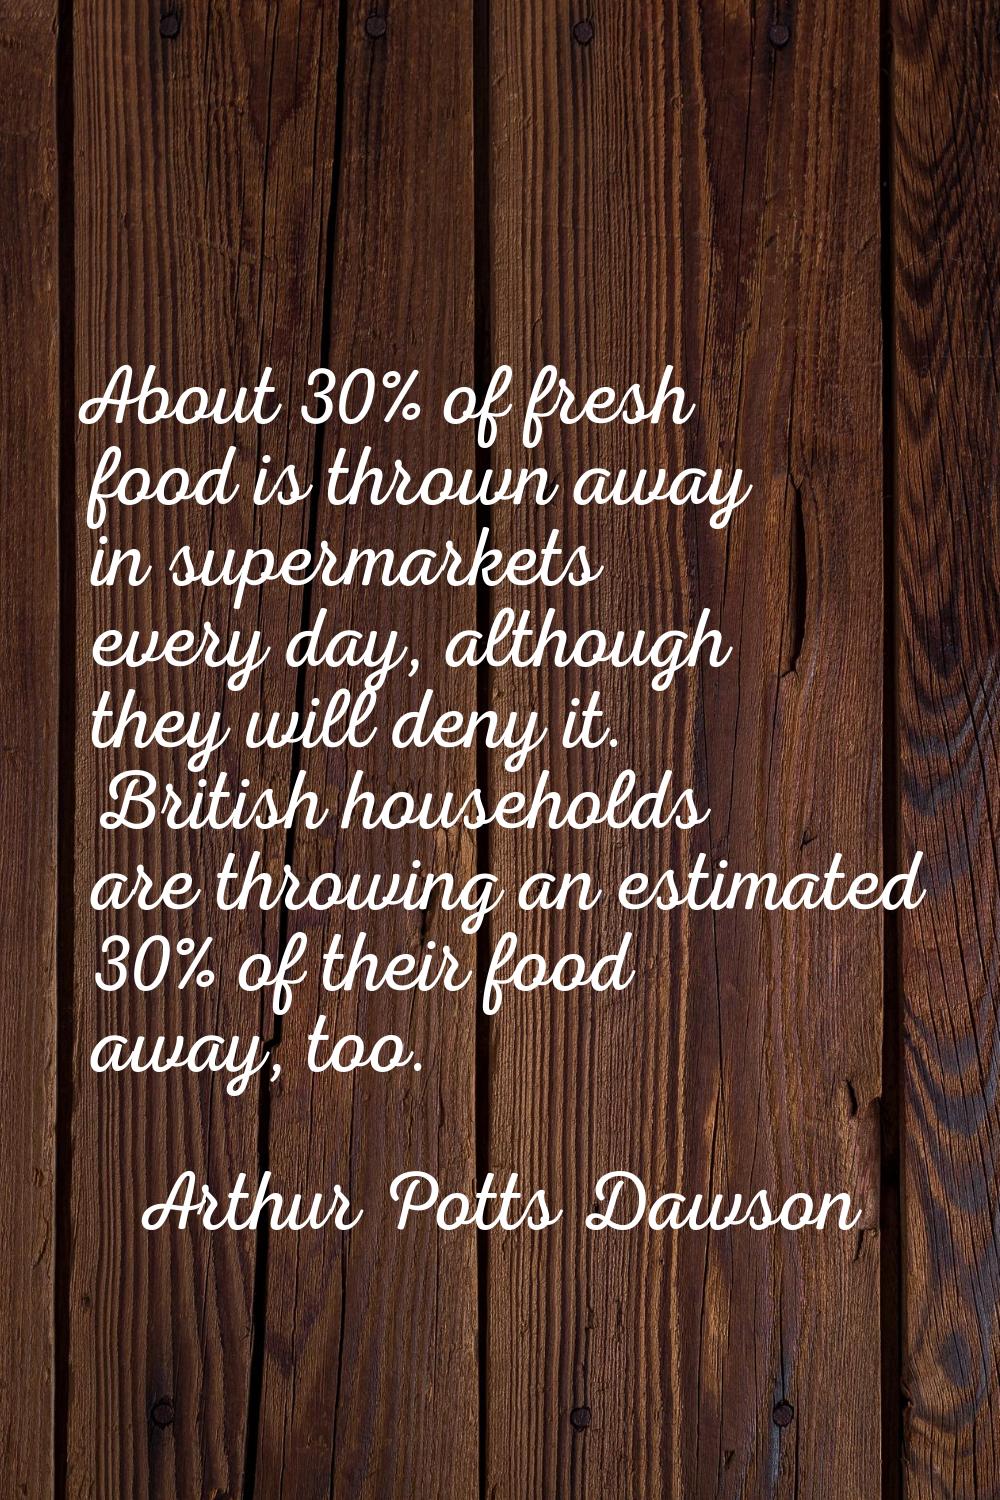 About 30% of fresh food is thrown away in supermarkets every day, although they will deny it. Briti